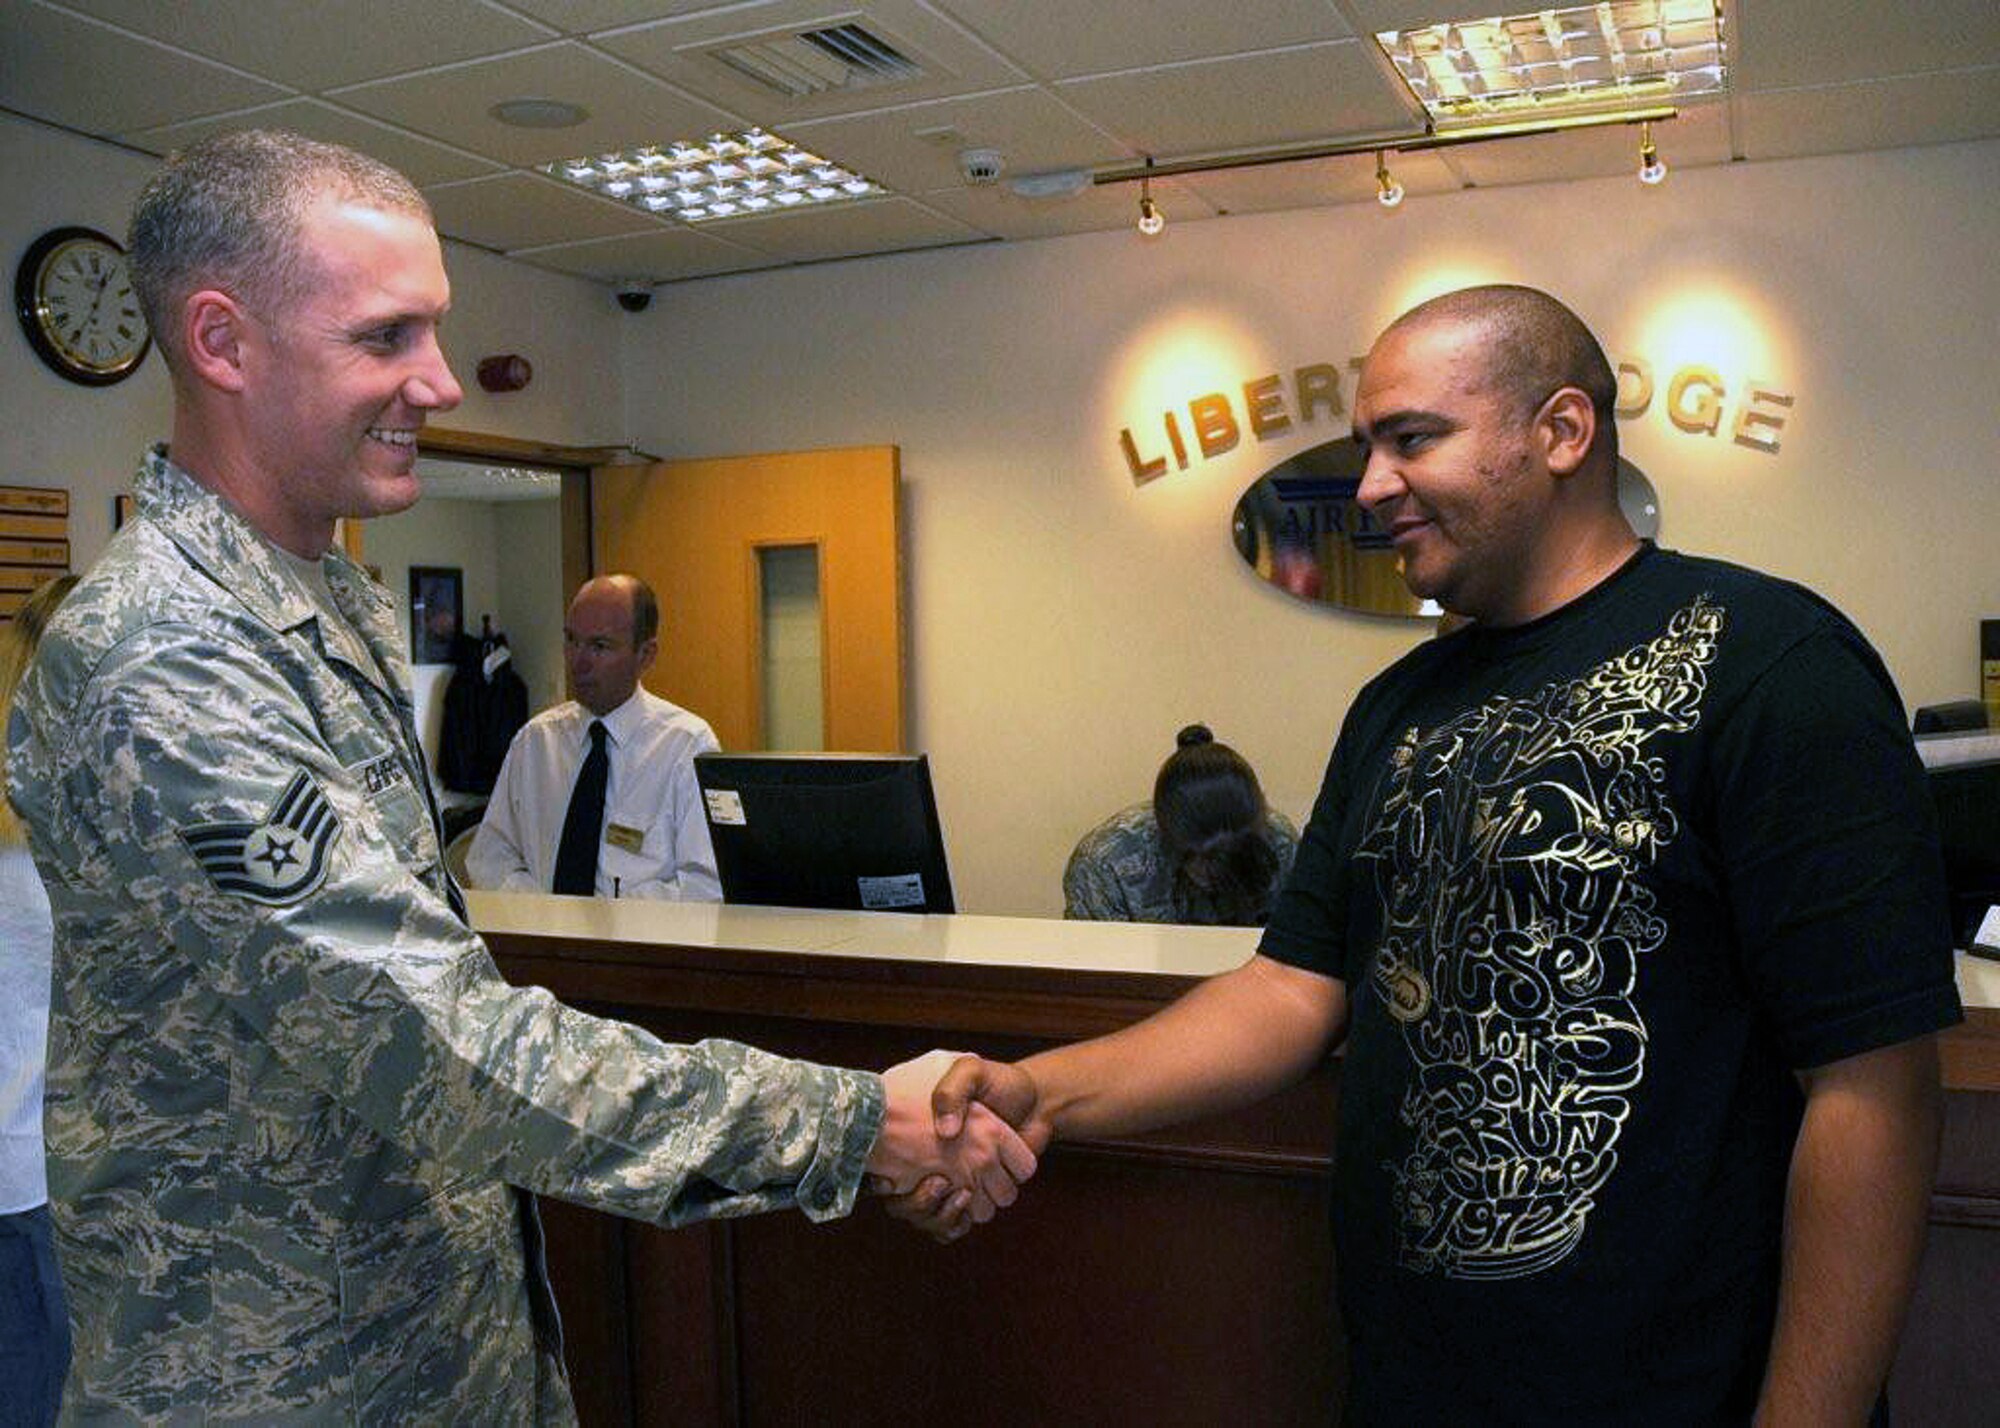 Staff Sgt. Keri Christensen (left), 48th Communications Squadron military postal clerk, welcomes Tech. Sgt. Mark Burleson, 48th CS military postal clerk, to RAF Lakenheath after his arrival August 25, 2009. The sponsorship program is designed to provide newcomers with a personal contact at their new base. Sponsors assist newcomers by arranging necessities such as lodging and a post box. The program is the first line of defense for inbound Airmen and their families.  (U.S. Air Force photo/A1C Eboni Knox)